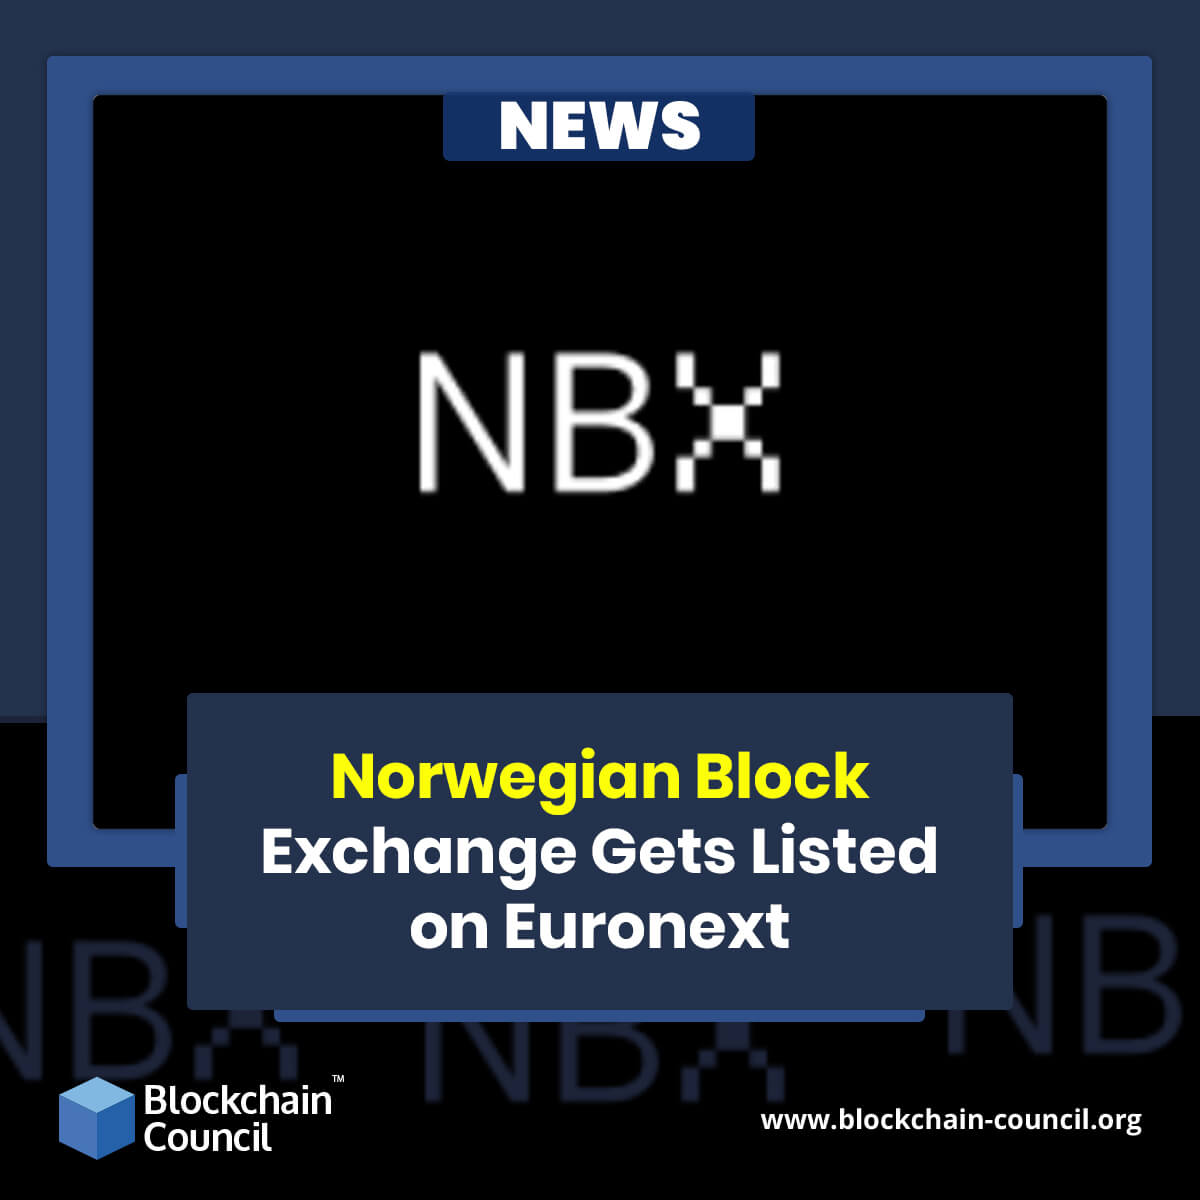 Norwegian Block Exchange Gets Listed on Euronext